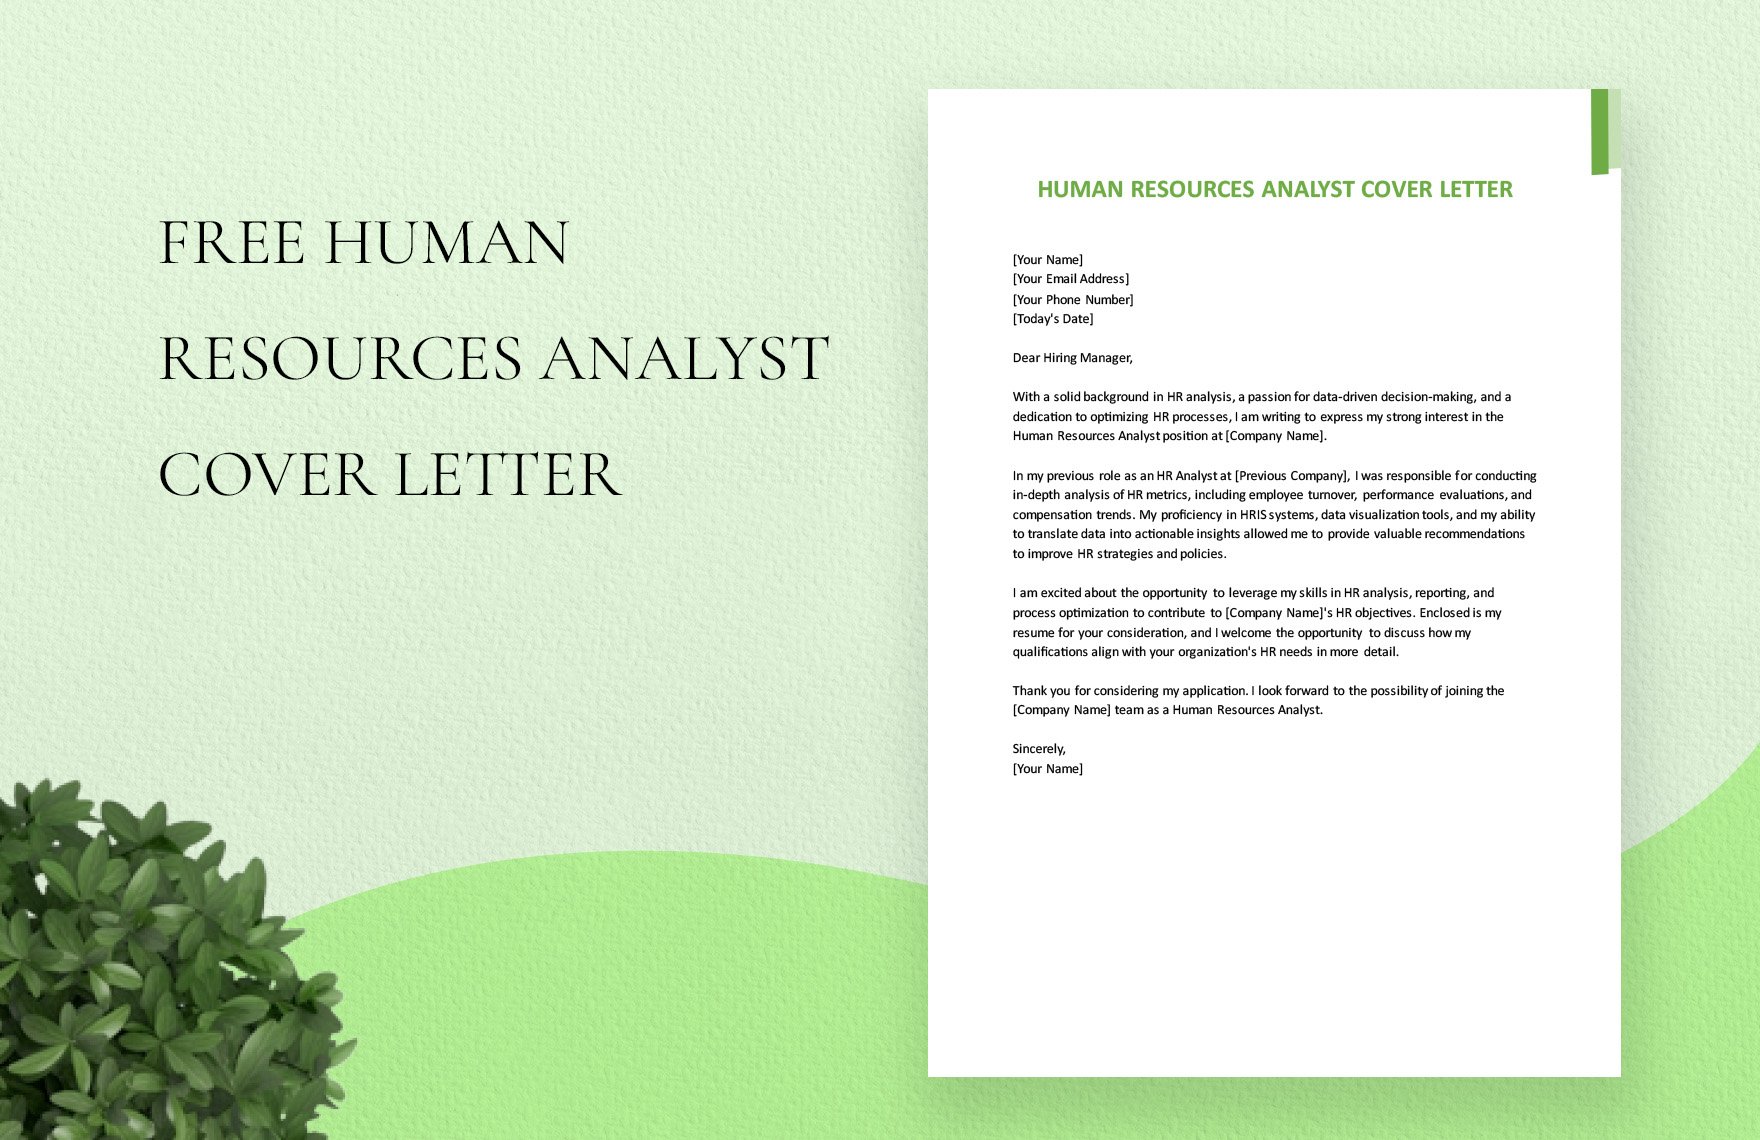 Human Resources Analyst Cover Letter